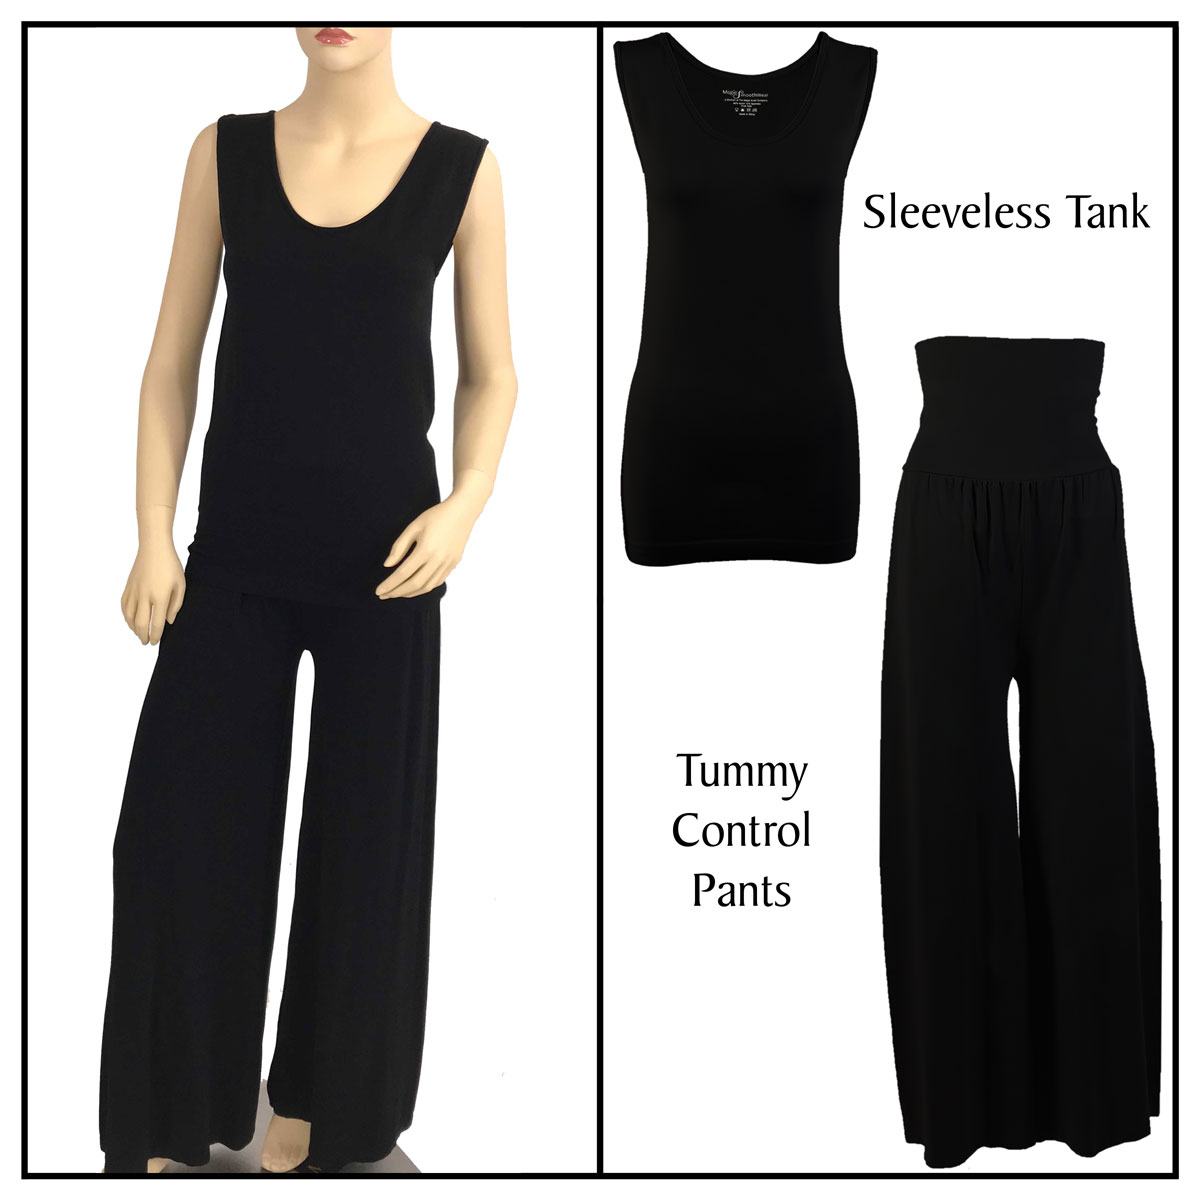 Black Sleeveless Top (One Size) with Pants